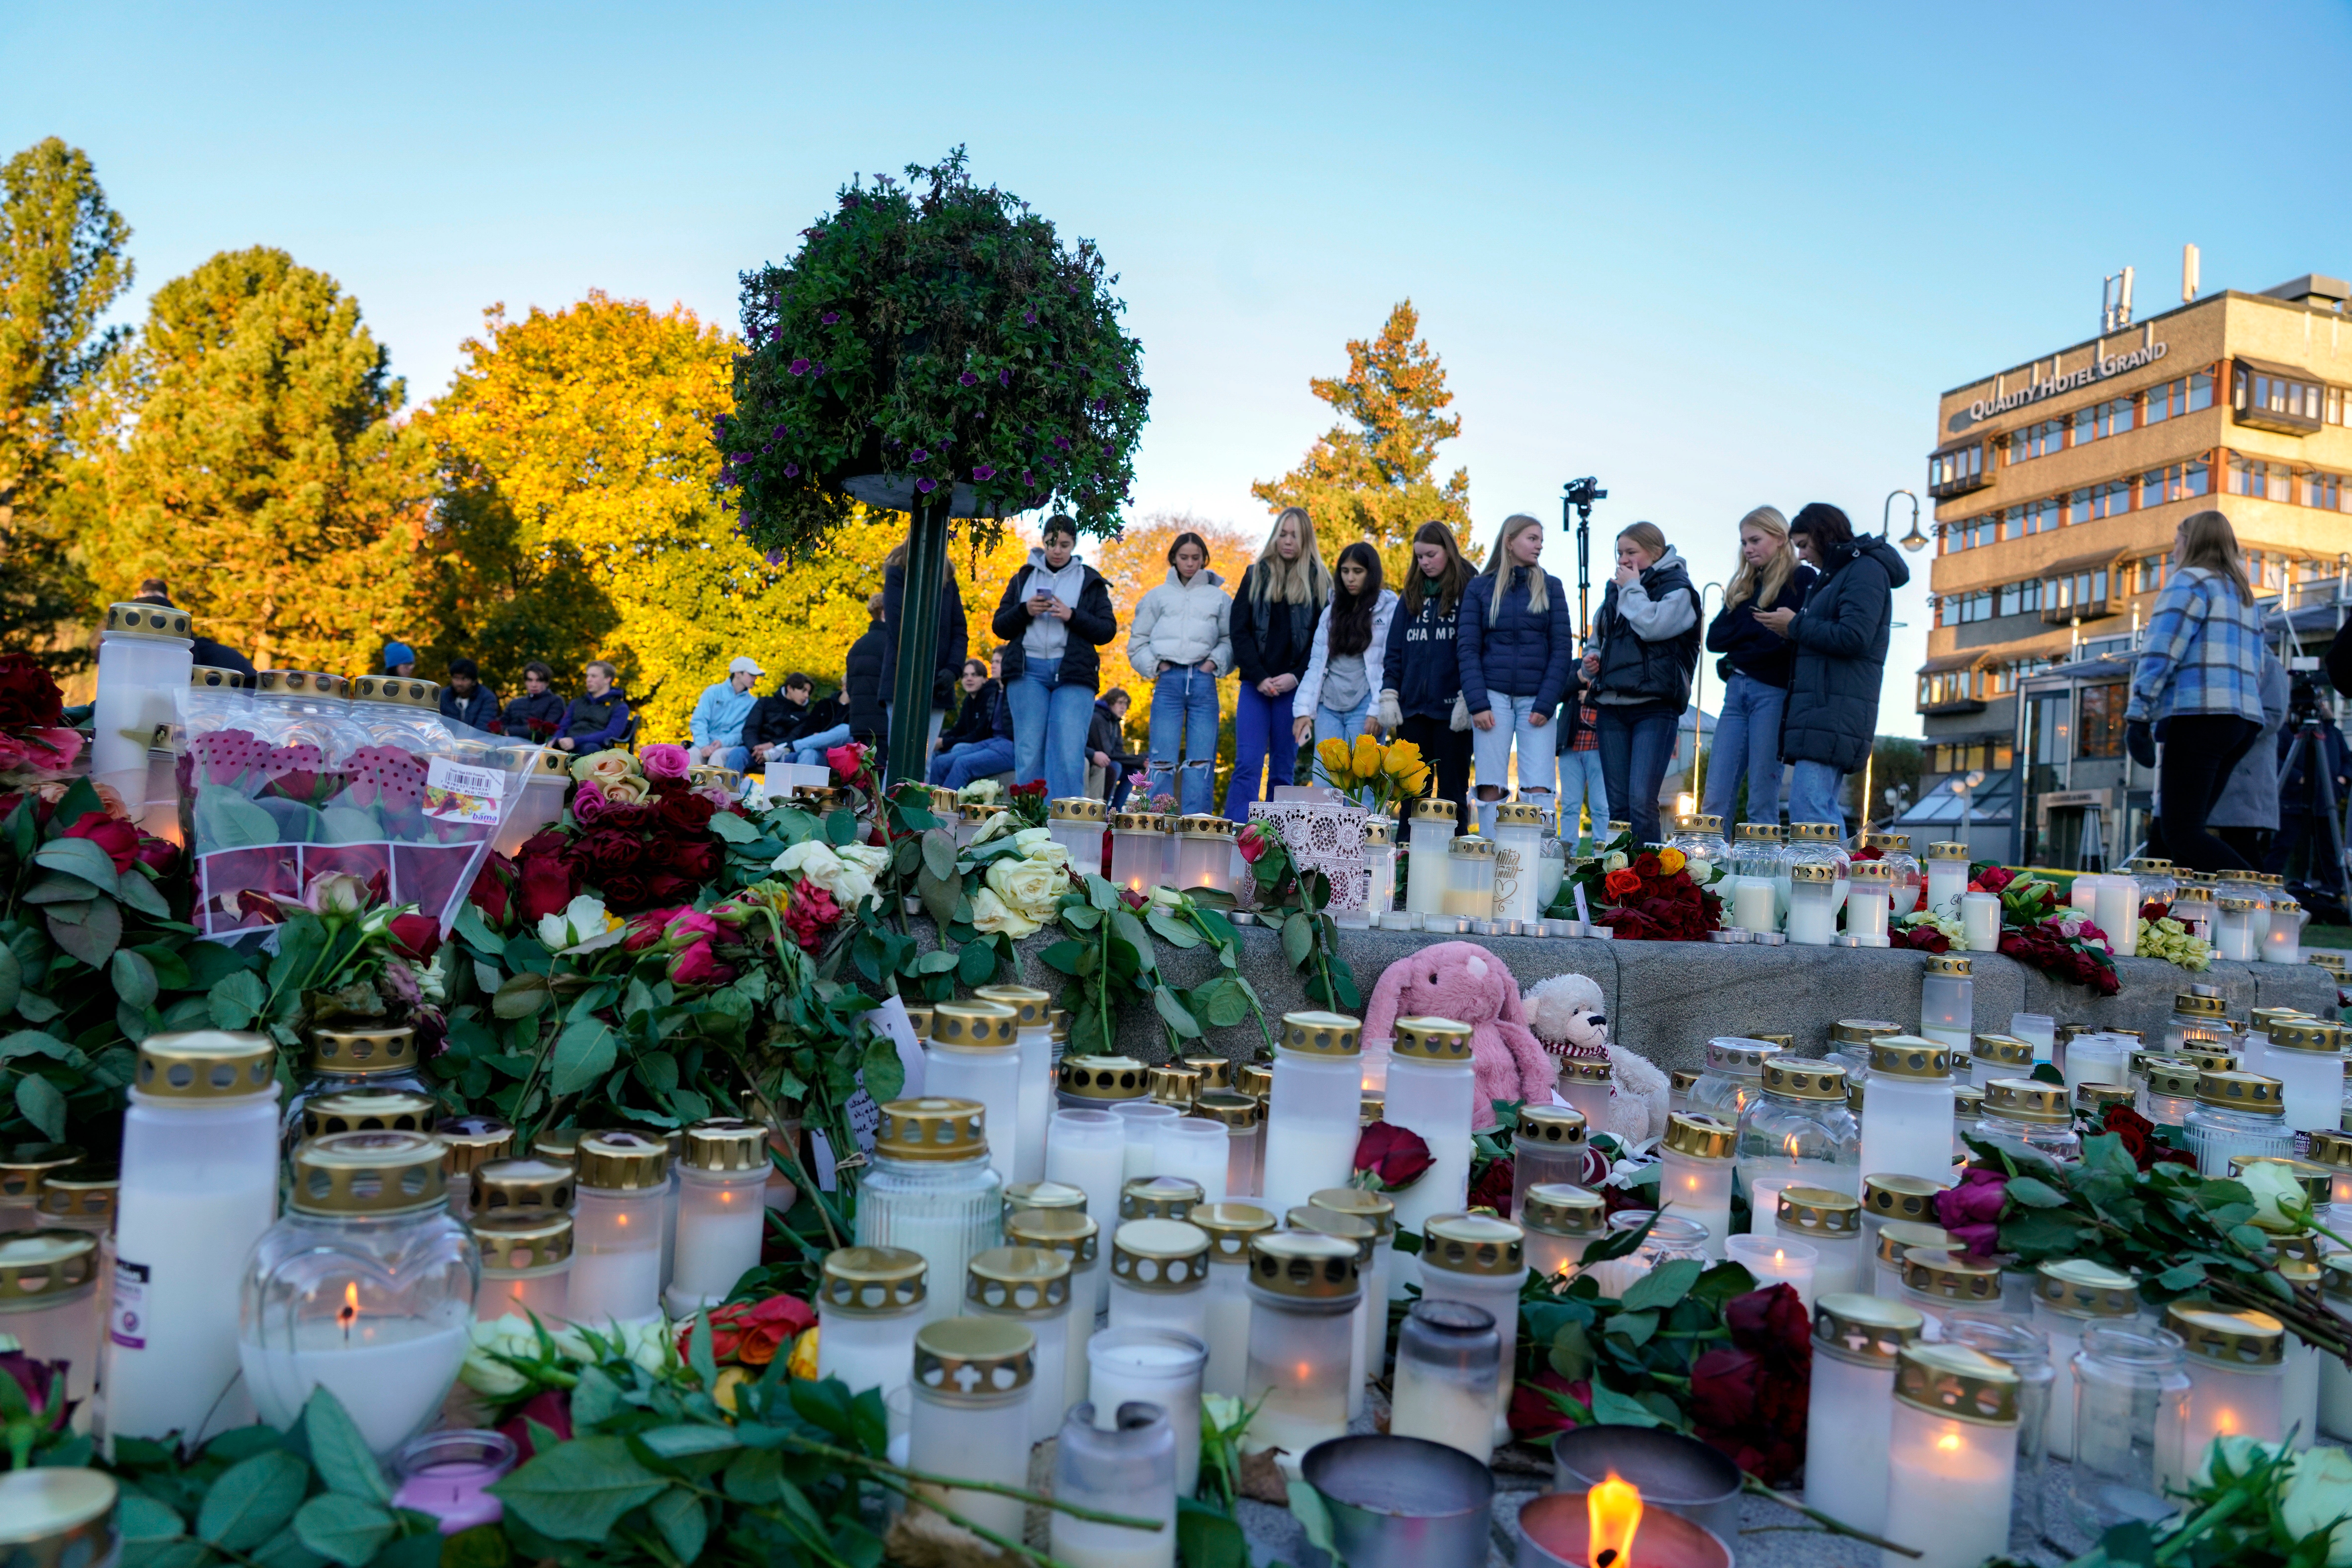 People pay their respects to the victims of the attack in Kongsberg, Norway.